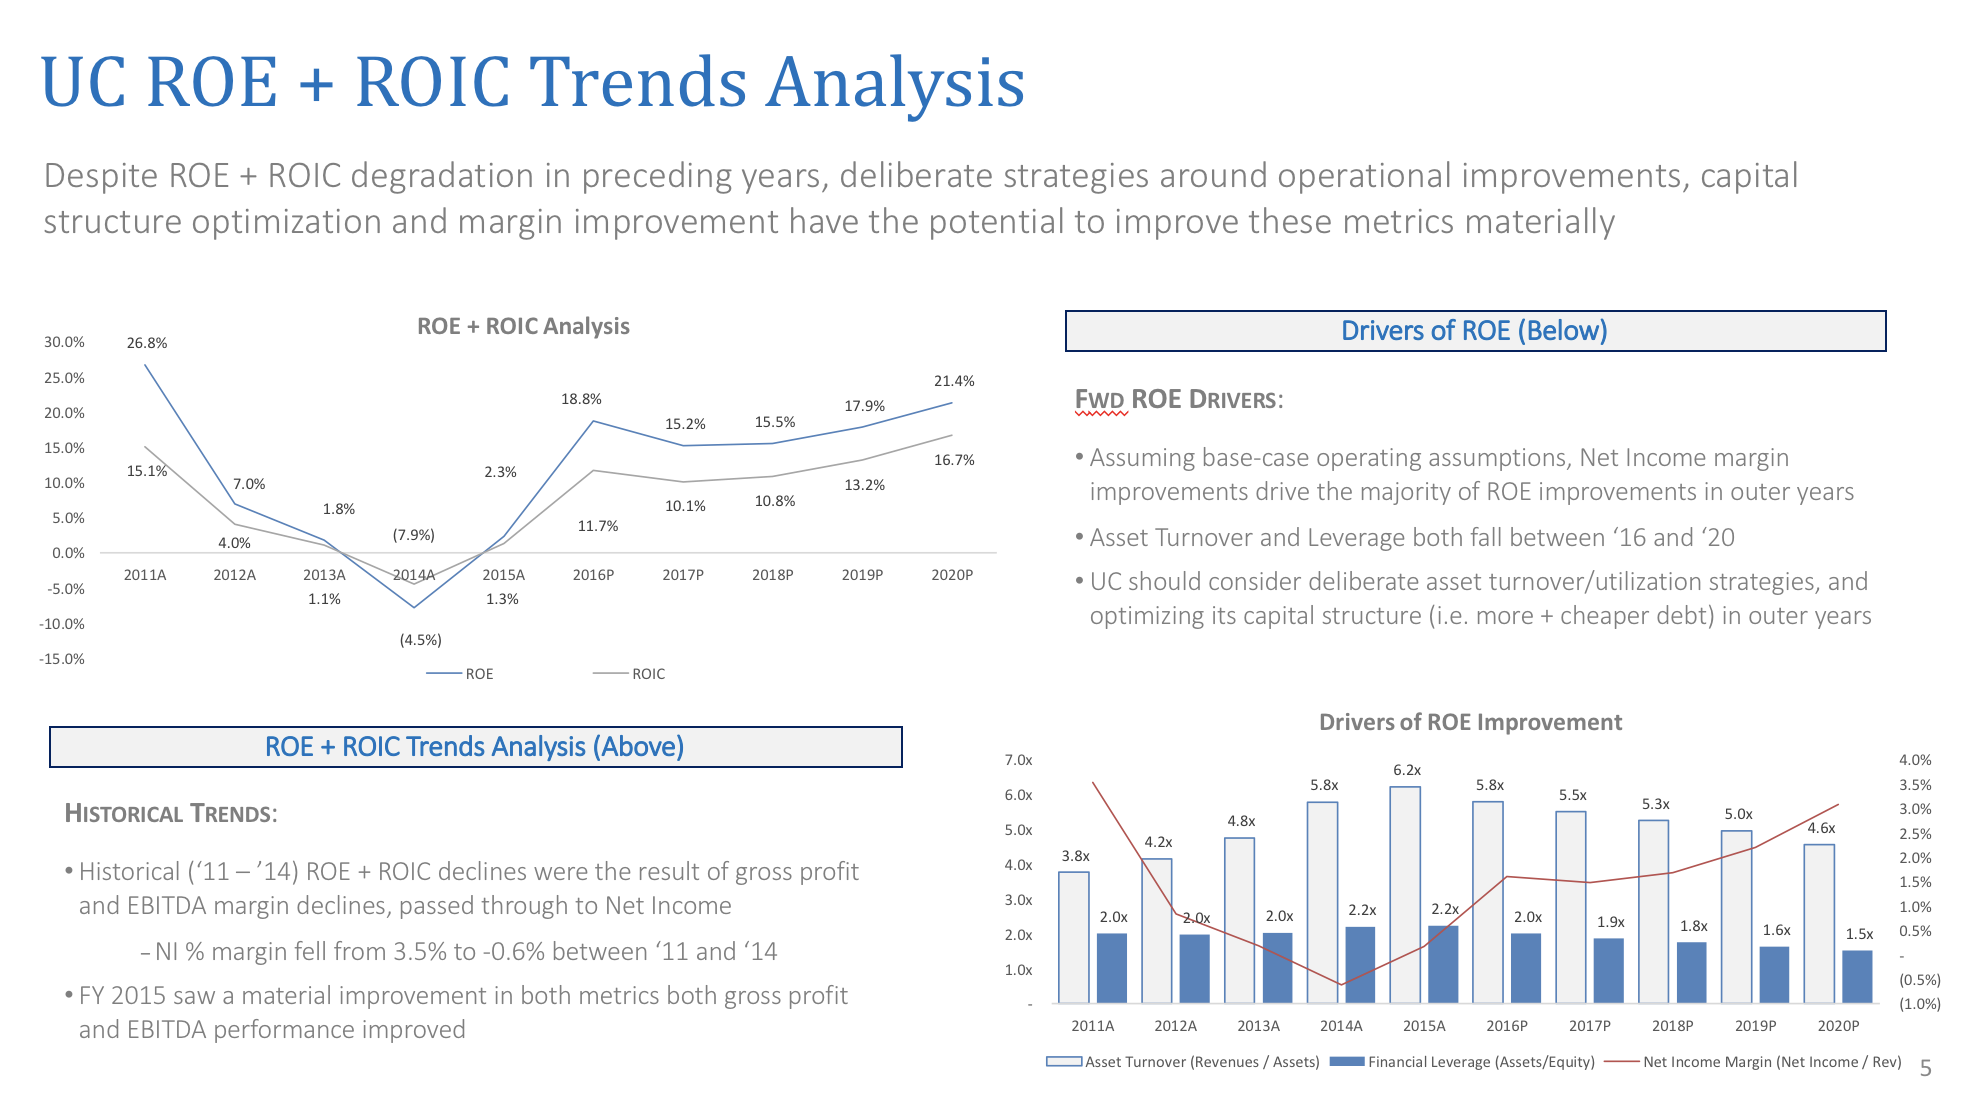 UC ROE + ROIC Trends Analysis